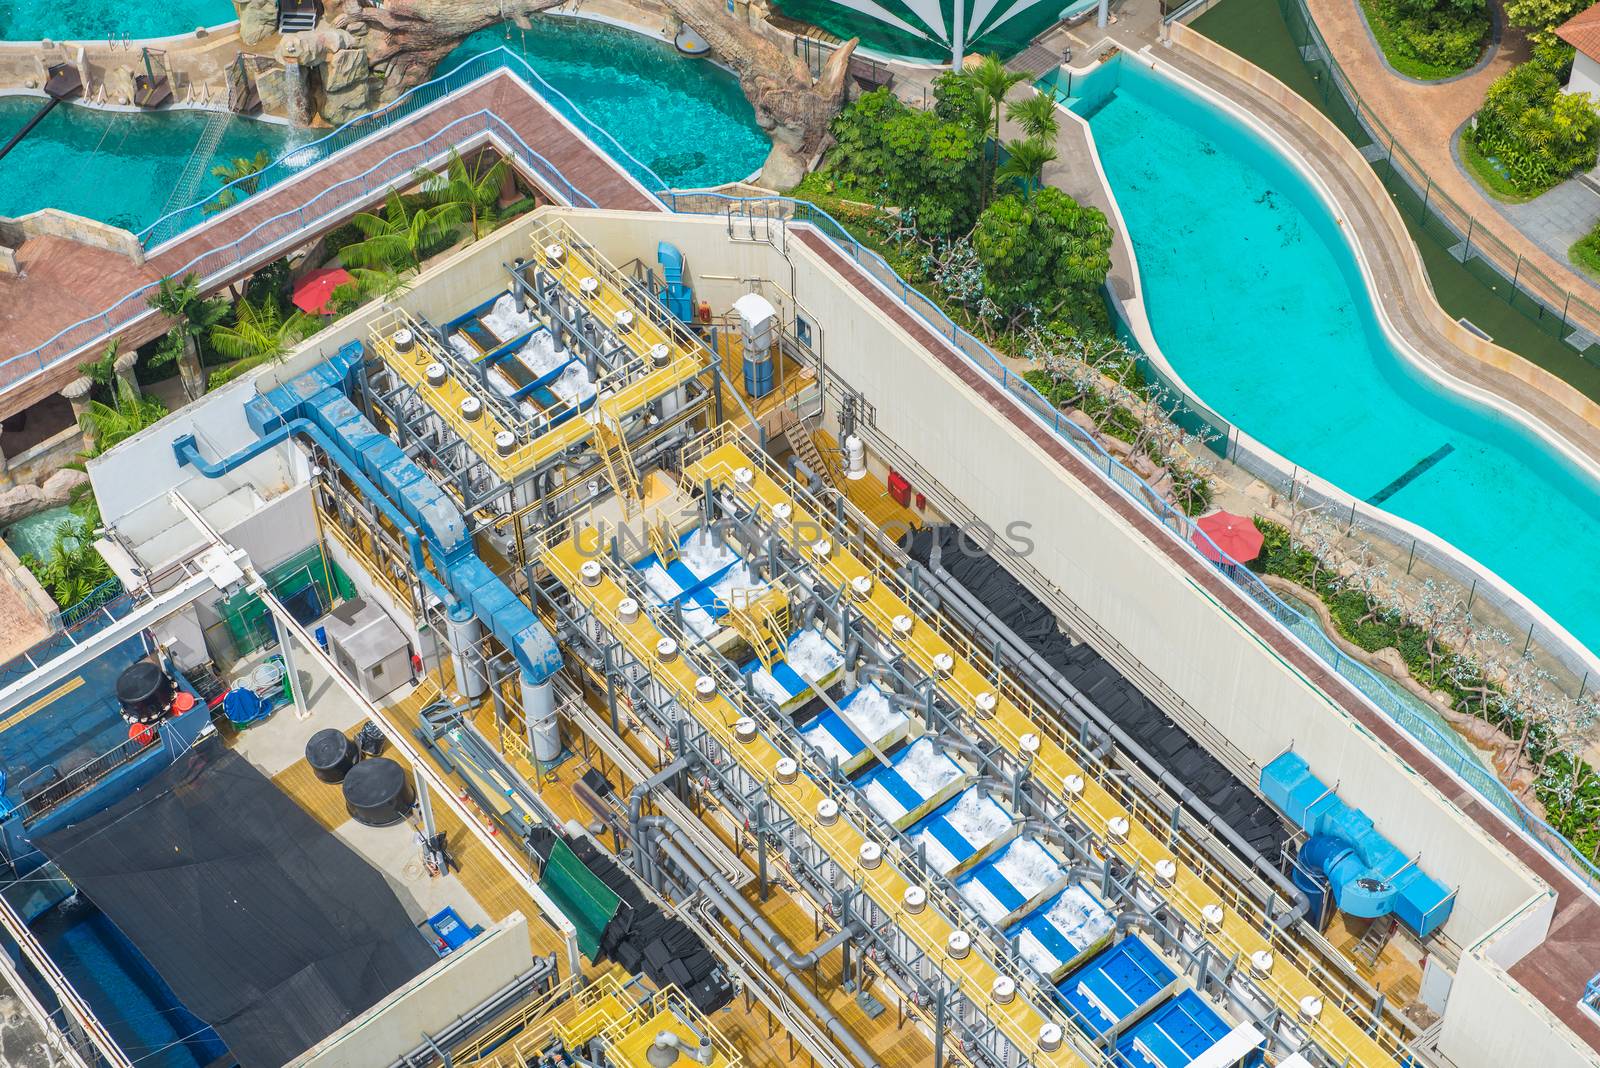 Bird's eye view of Water treatment plants on swimming pool.